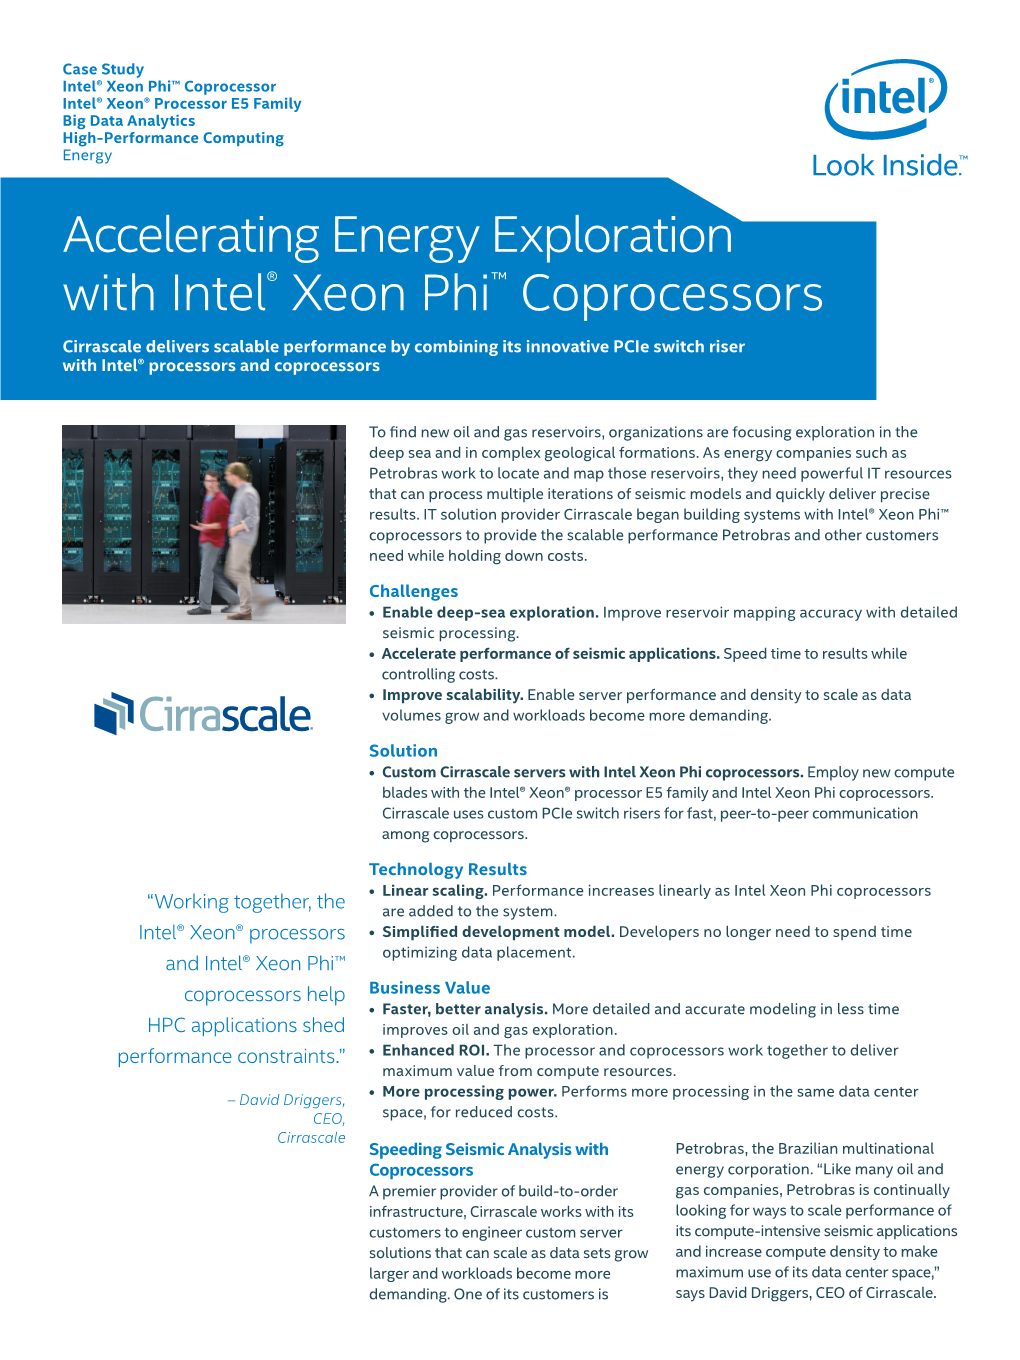 Intel Cirrascale and Petrobras Case Study